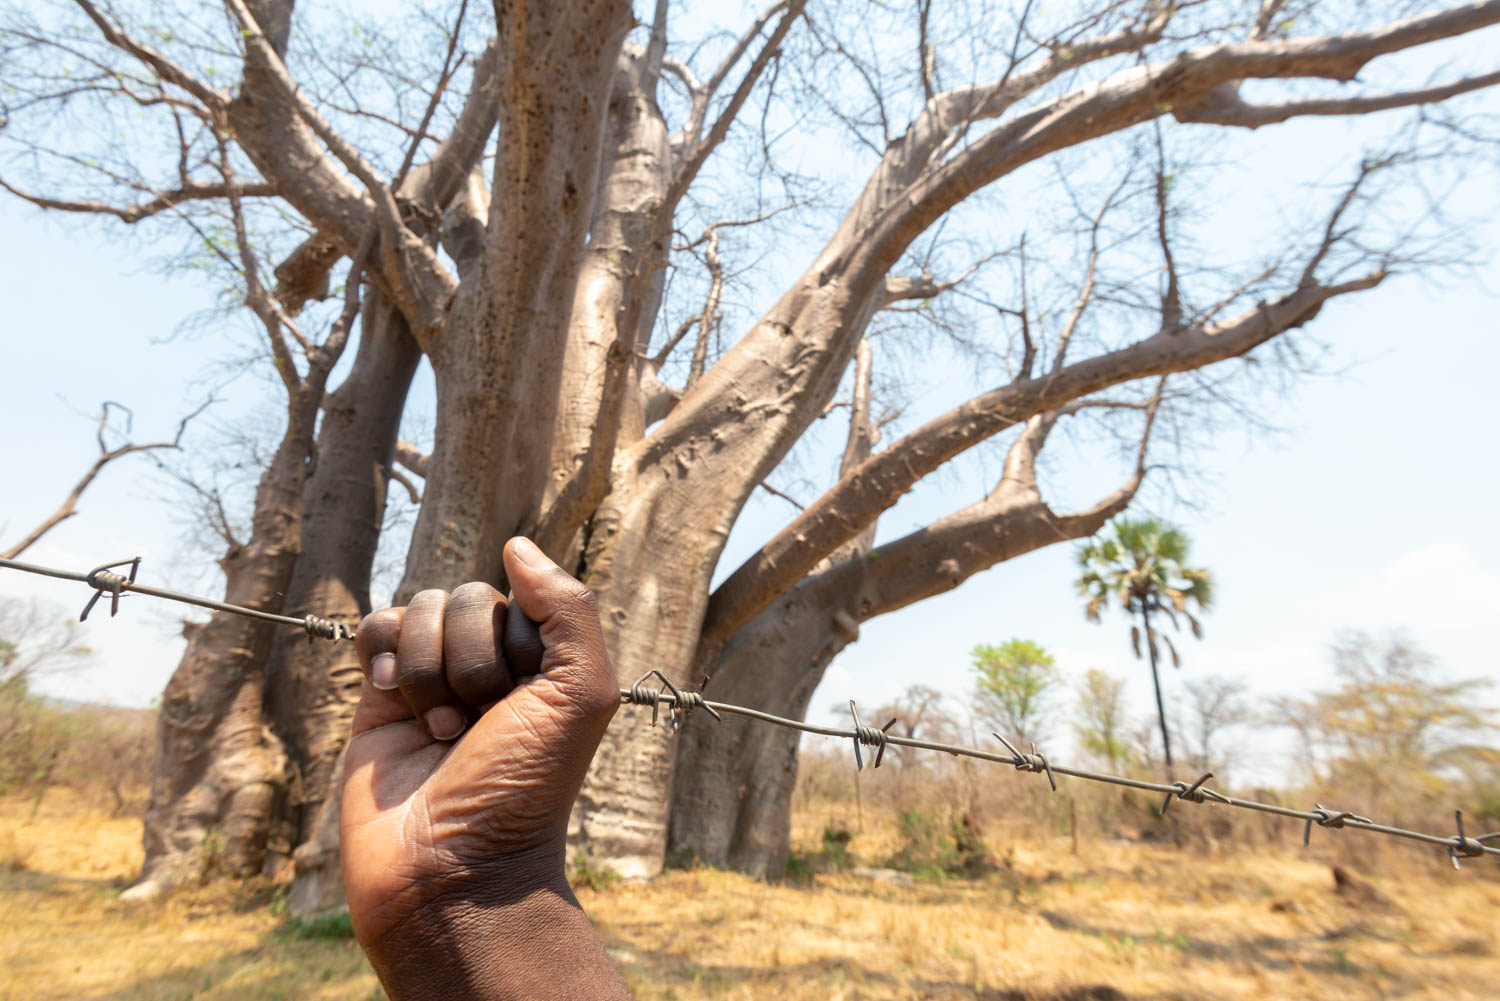 Barbed wire in front of baobab tree